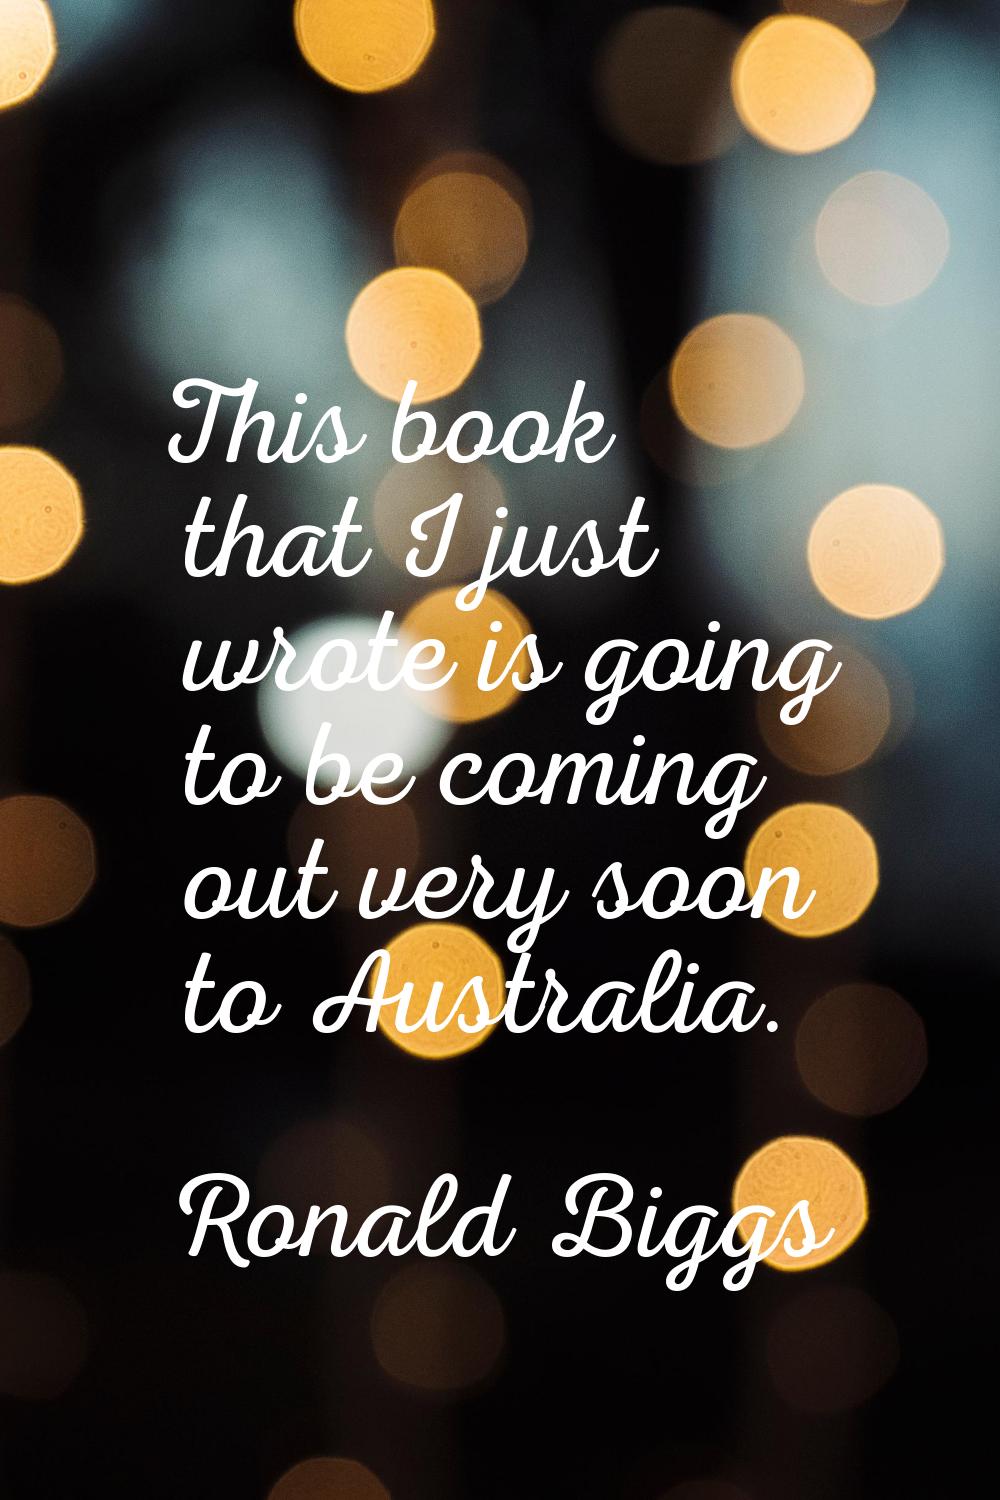 This book that I just wrote is going to be coming out very soon to Australia.